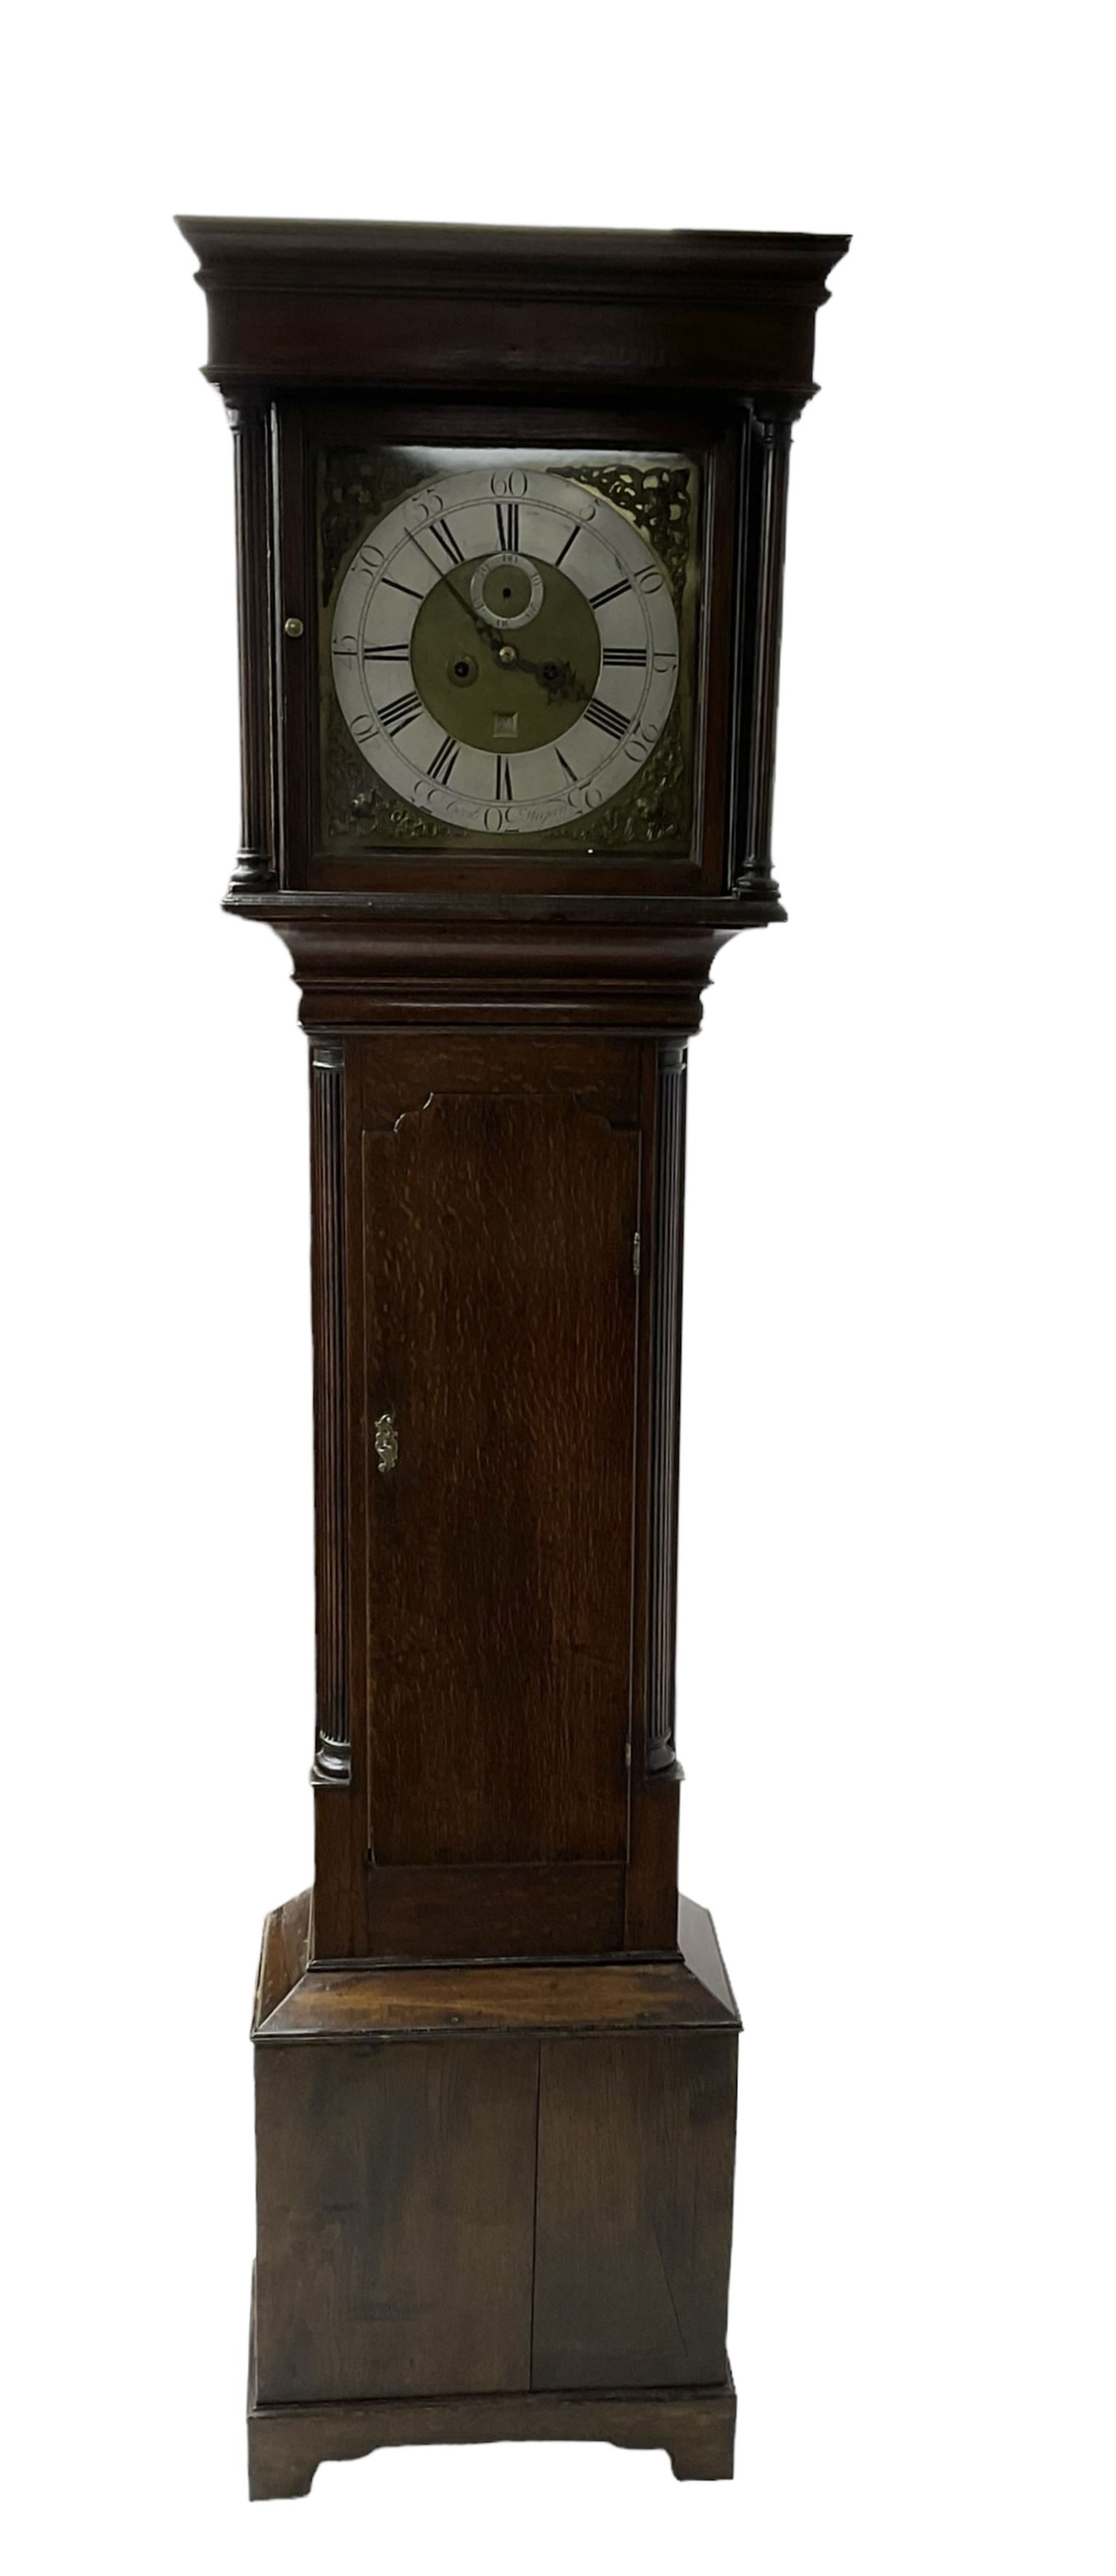 Archibald Coates of Wigan - Eight-day 18th century oak longcase clock with a flat top and blind fri